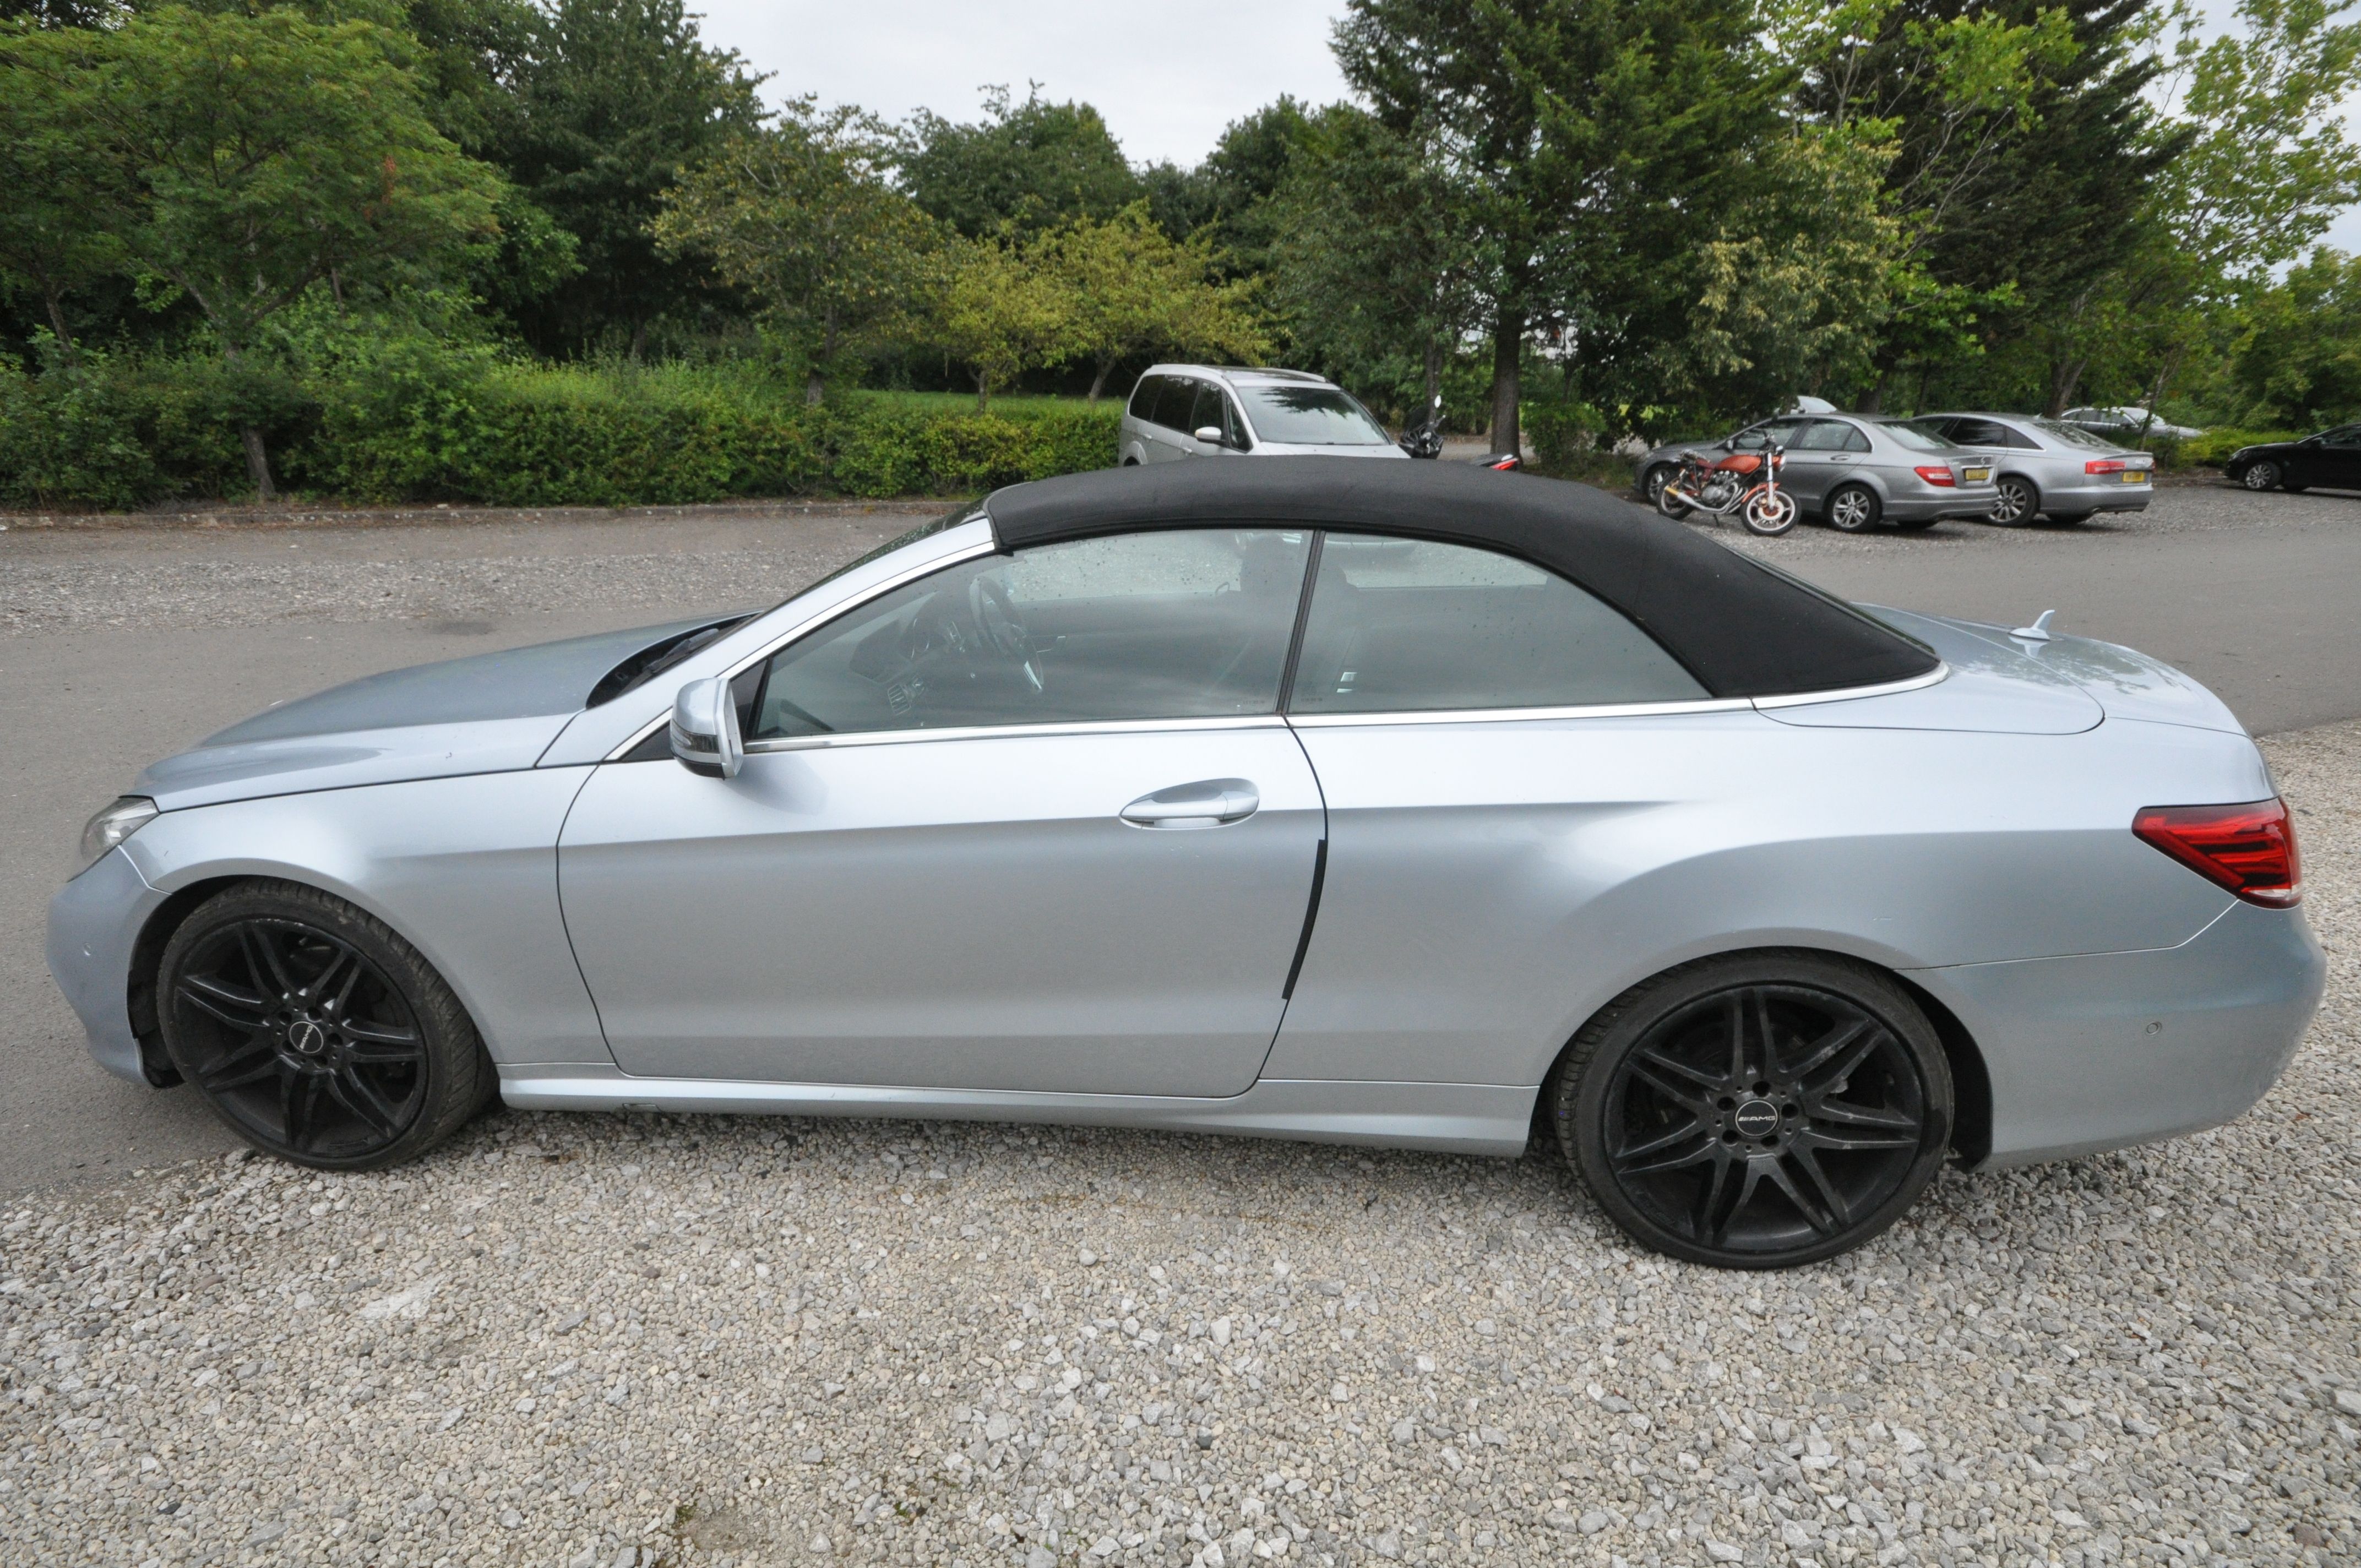 A 2014 Mercedes E350 AMG SPORT BLUETEC CABRIOLET - WJZ 6629 - This vehicle was first registered in - Image 5 of 13